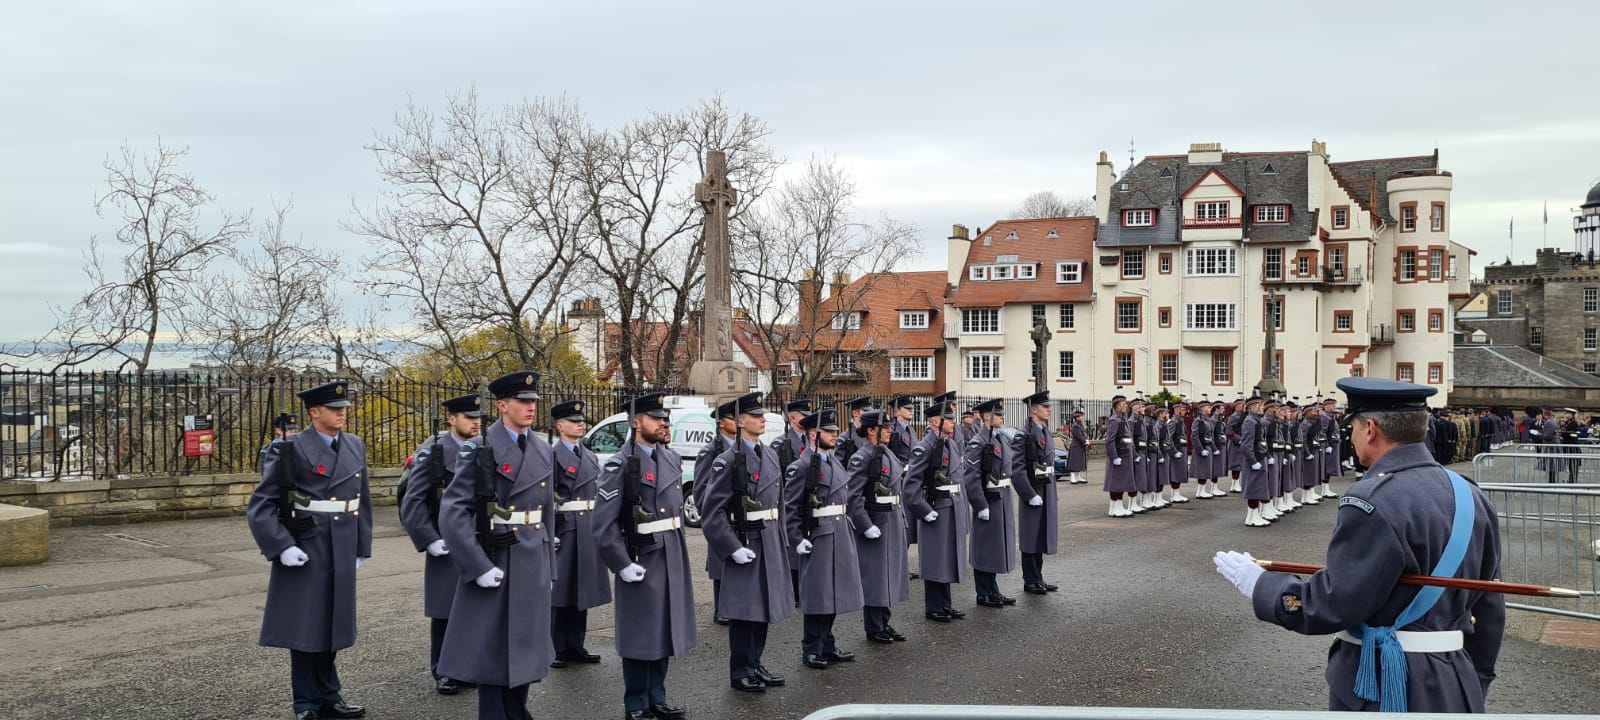 51 Sqn RAF Regiment formed up ready for the parade